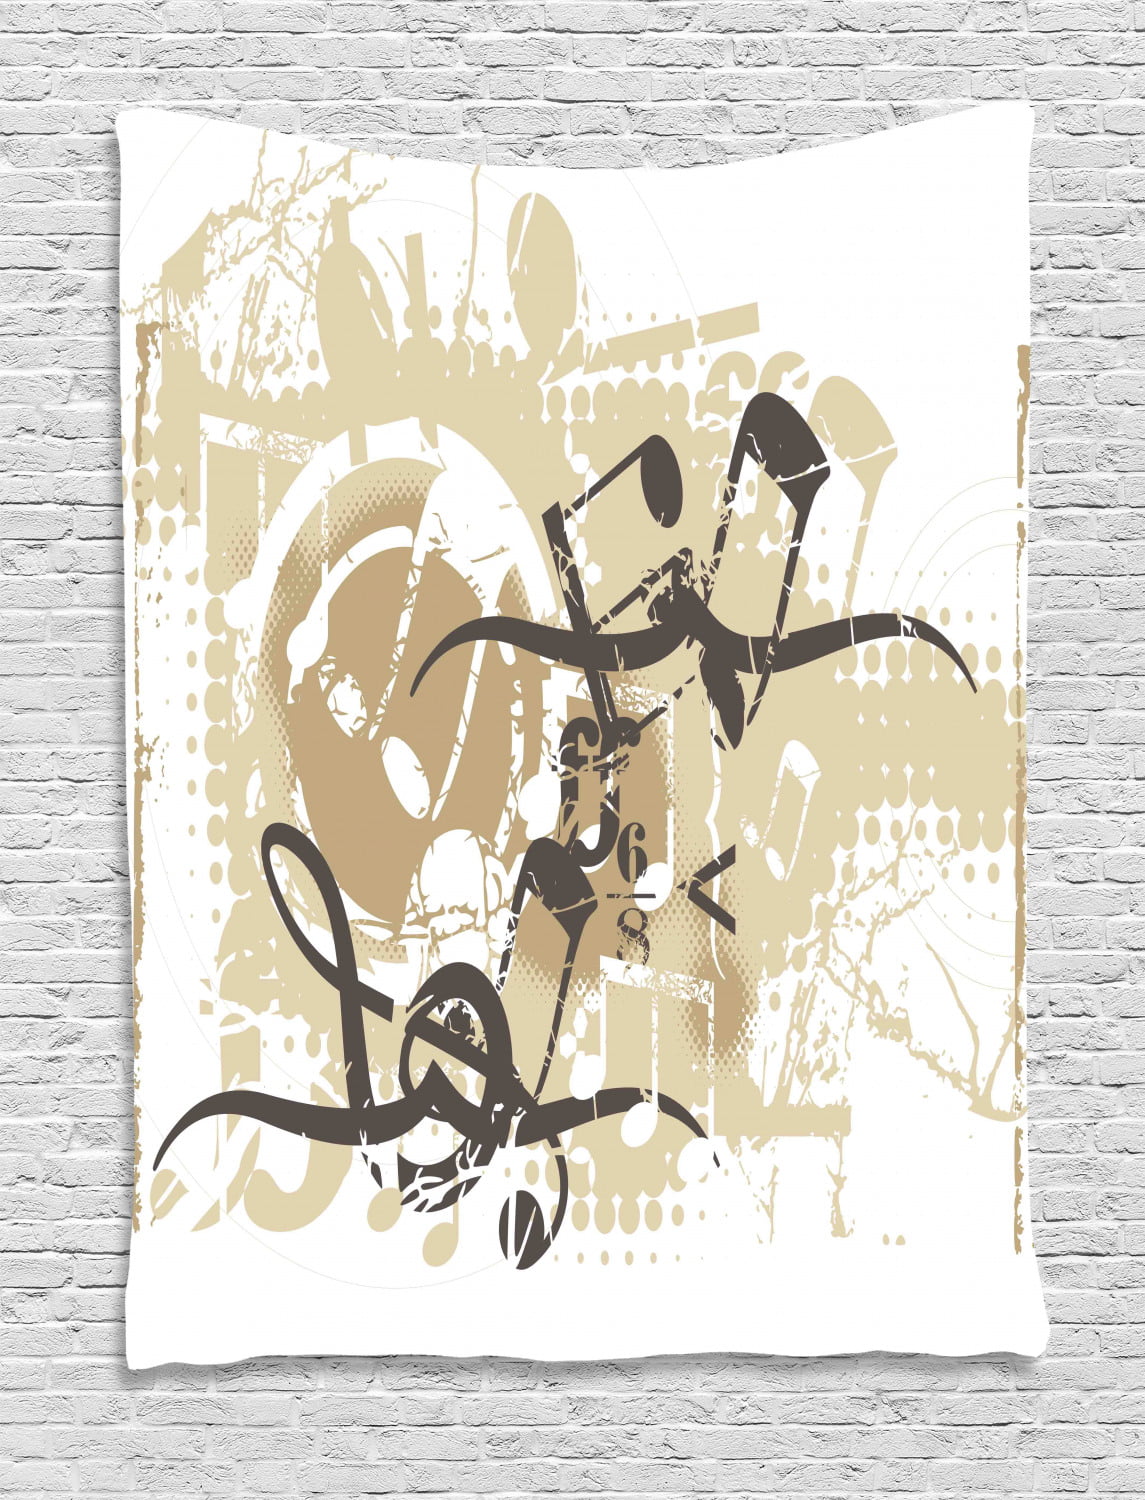 Details about   Music Notes Grunge Floral CANVAS WALL ART DECO LARGE READY TO HANG all sizes